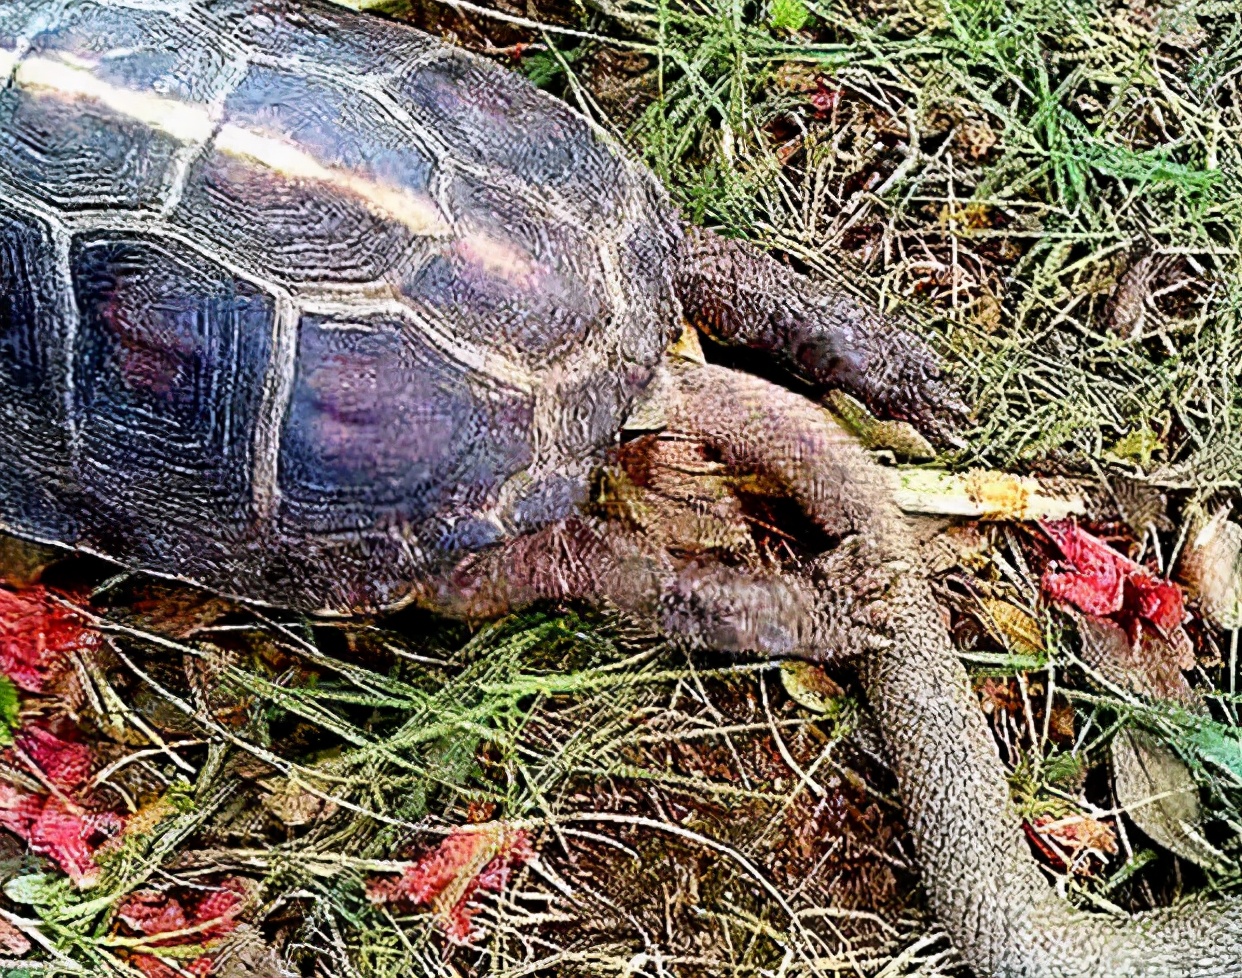 The tortoise was entangled in the snake, thinking it was inevitable to die, after sticking its head out of the turtle shell, a counter-kill - iNEWS